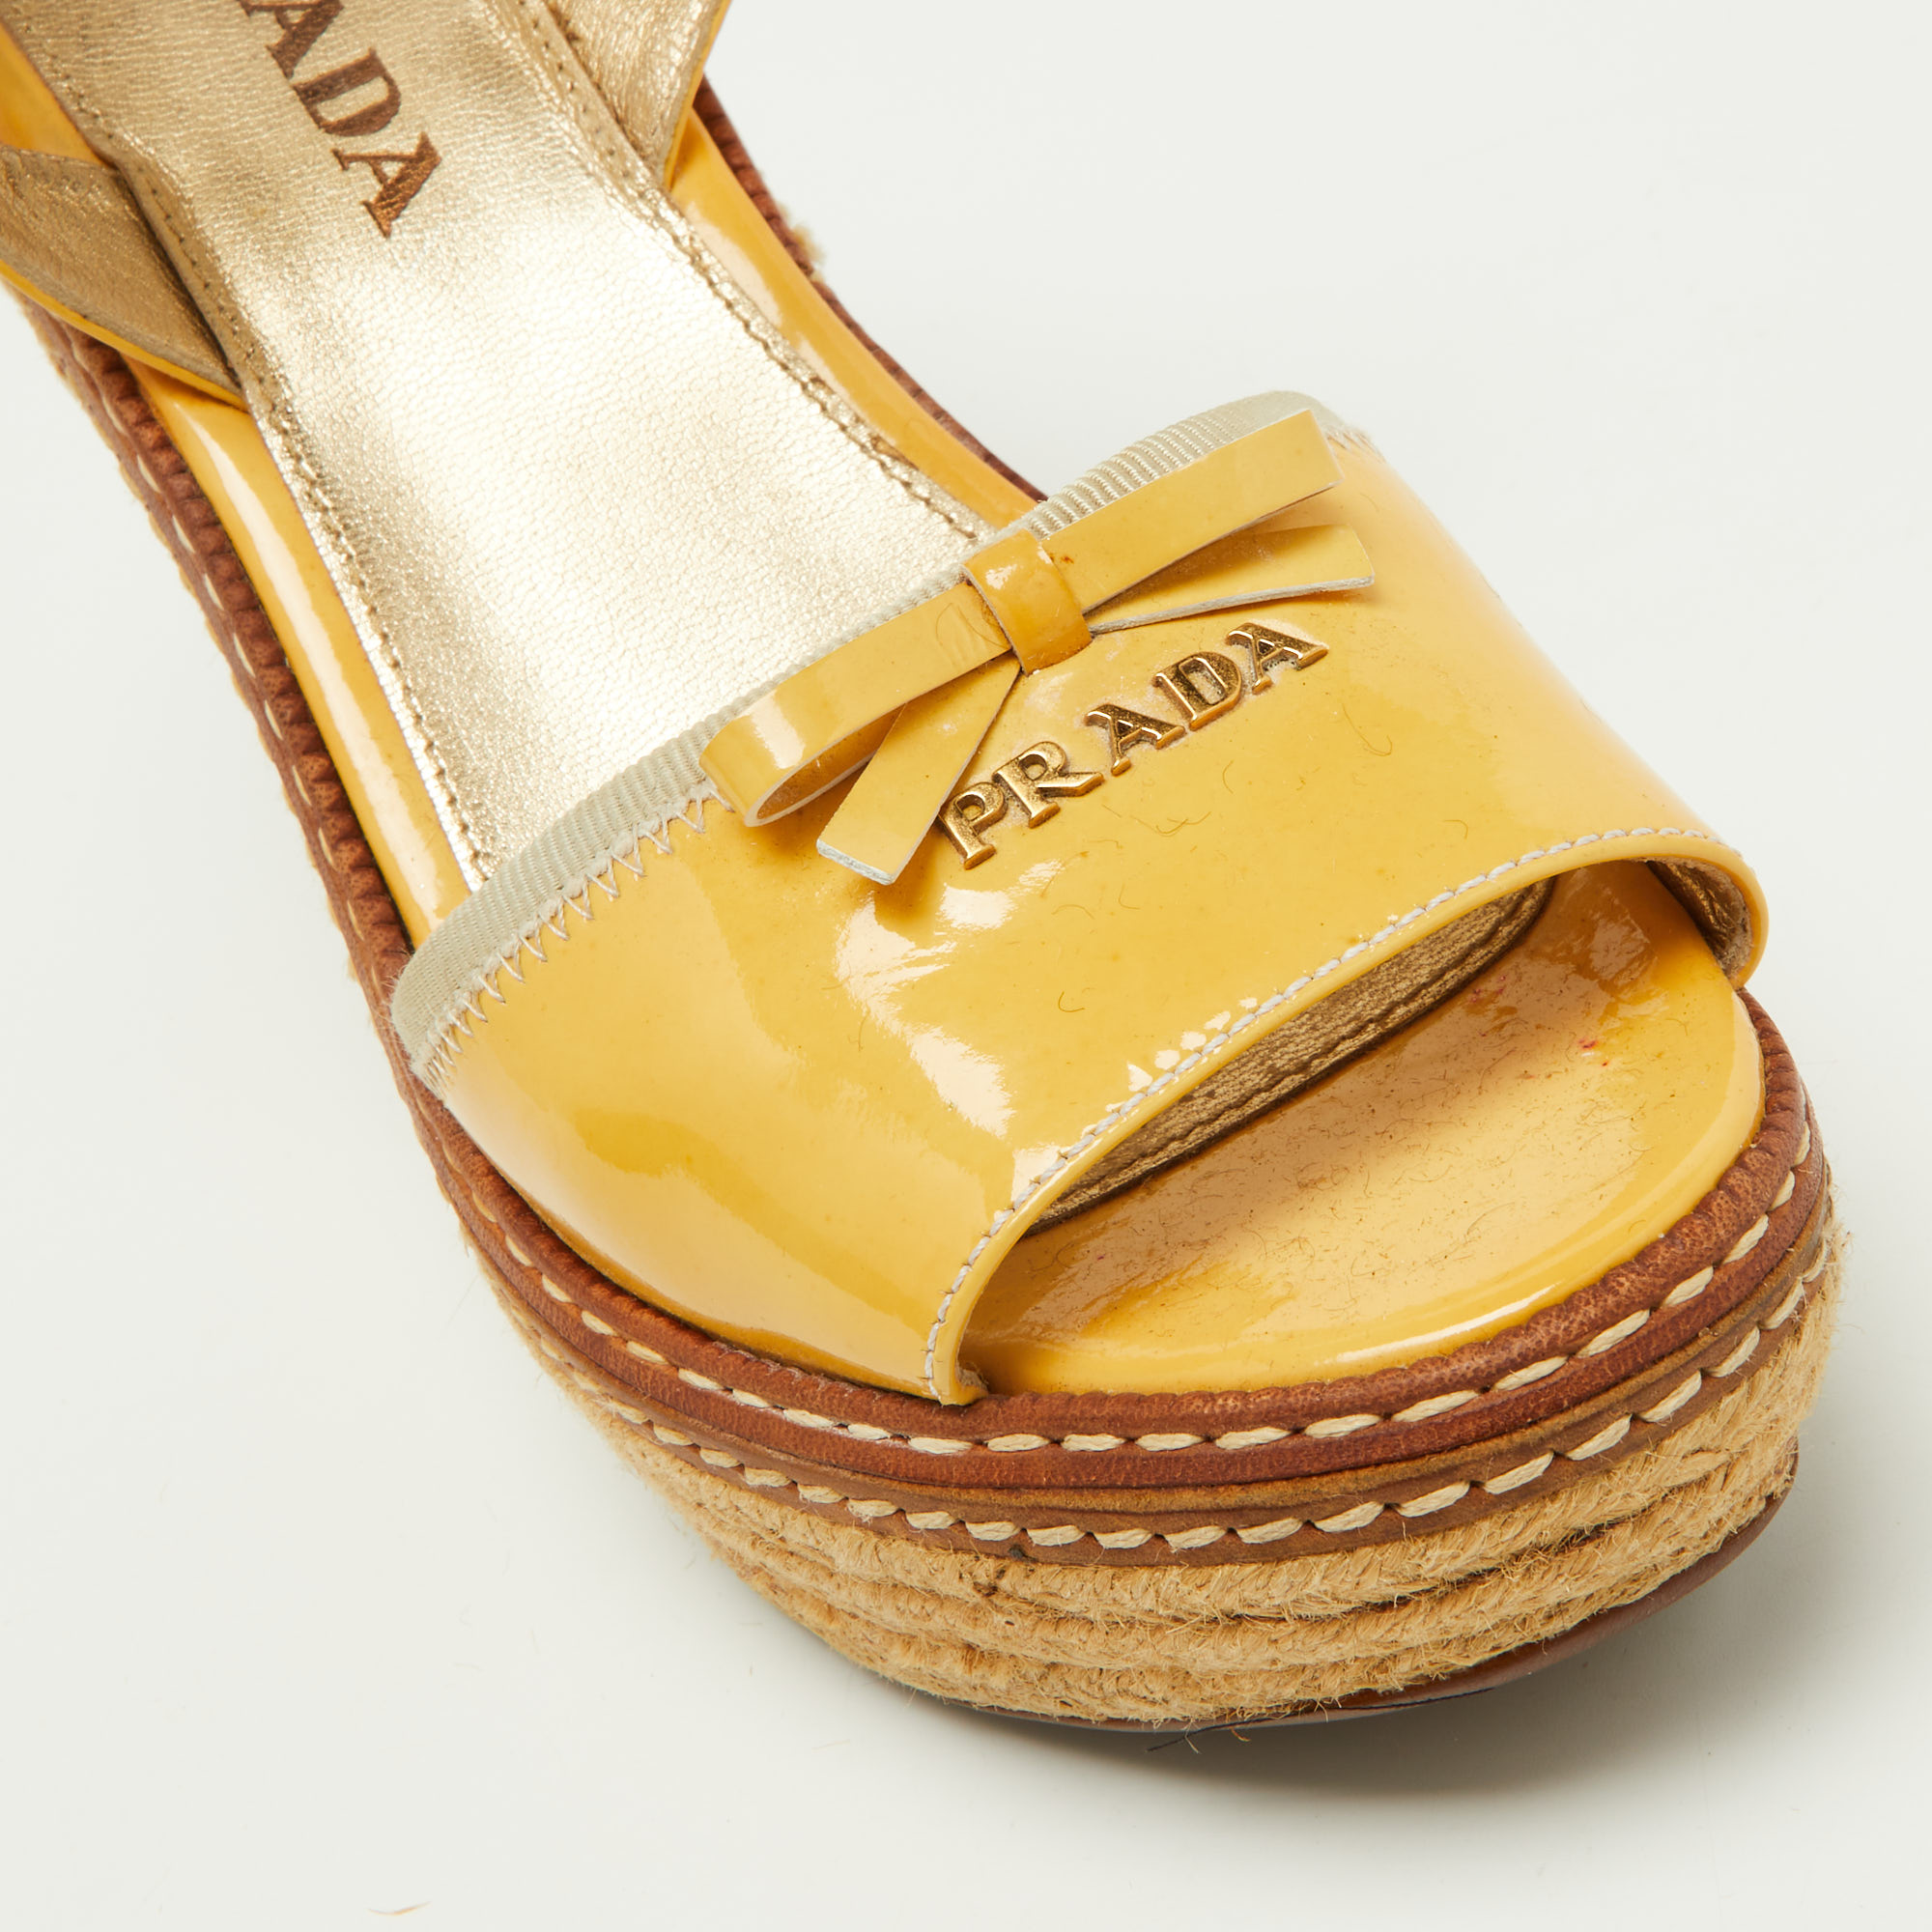 Prada Yellow Patent Leather Bow Espadrille Wedge Platform Ankle Strap Sandals Size 35.5